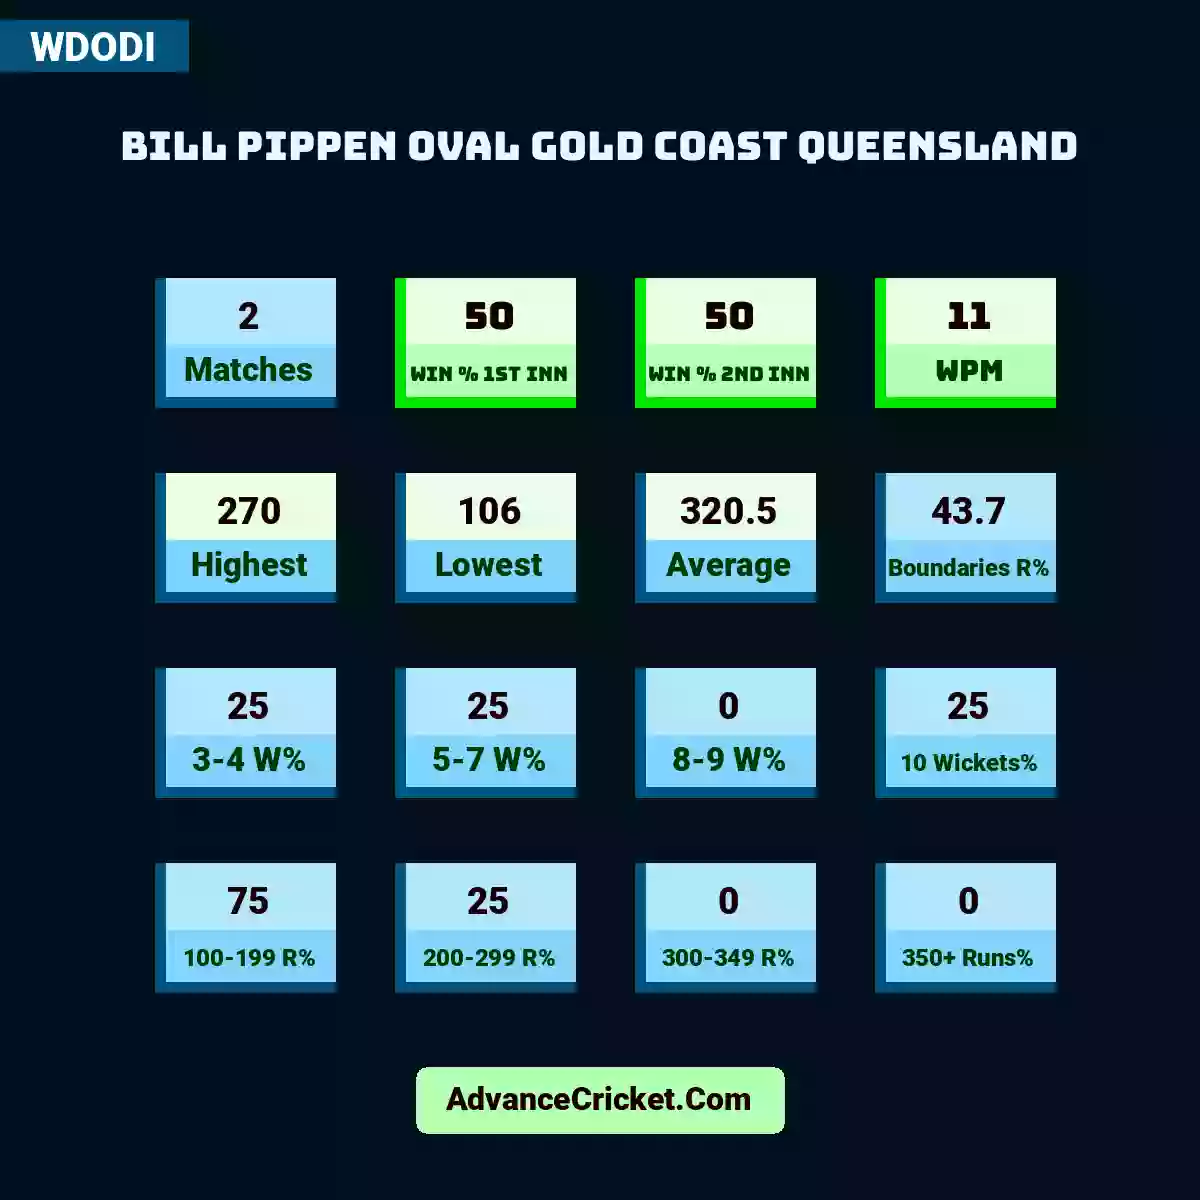 Image showing Bill Pippen Oval Gold Coast Queensland with Matches: 2, Win % 1st Inn: 50, Win % 2nd Inn: 50, WPM: 11, Highest: 270, Lowest: 106, Average: 320.5, Boundaries R%: 43.7, 3-4 W%: 25, 5-7 W%: 25, 8-9 W%: 0, 10 Wickets%: 25, 100-199 R%: 75, 200-299 R%: 25, 300-349 R%: 0, 350+ Runs%: 0.